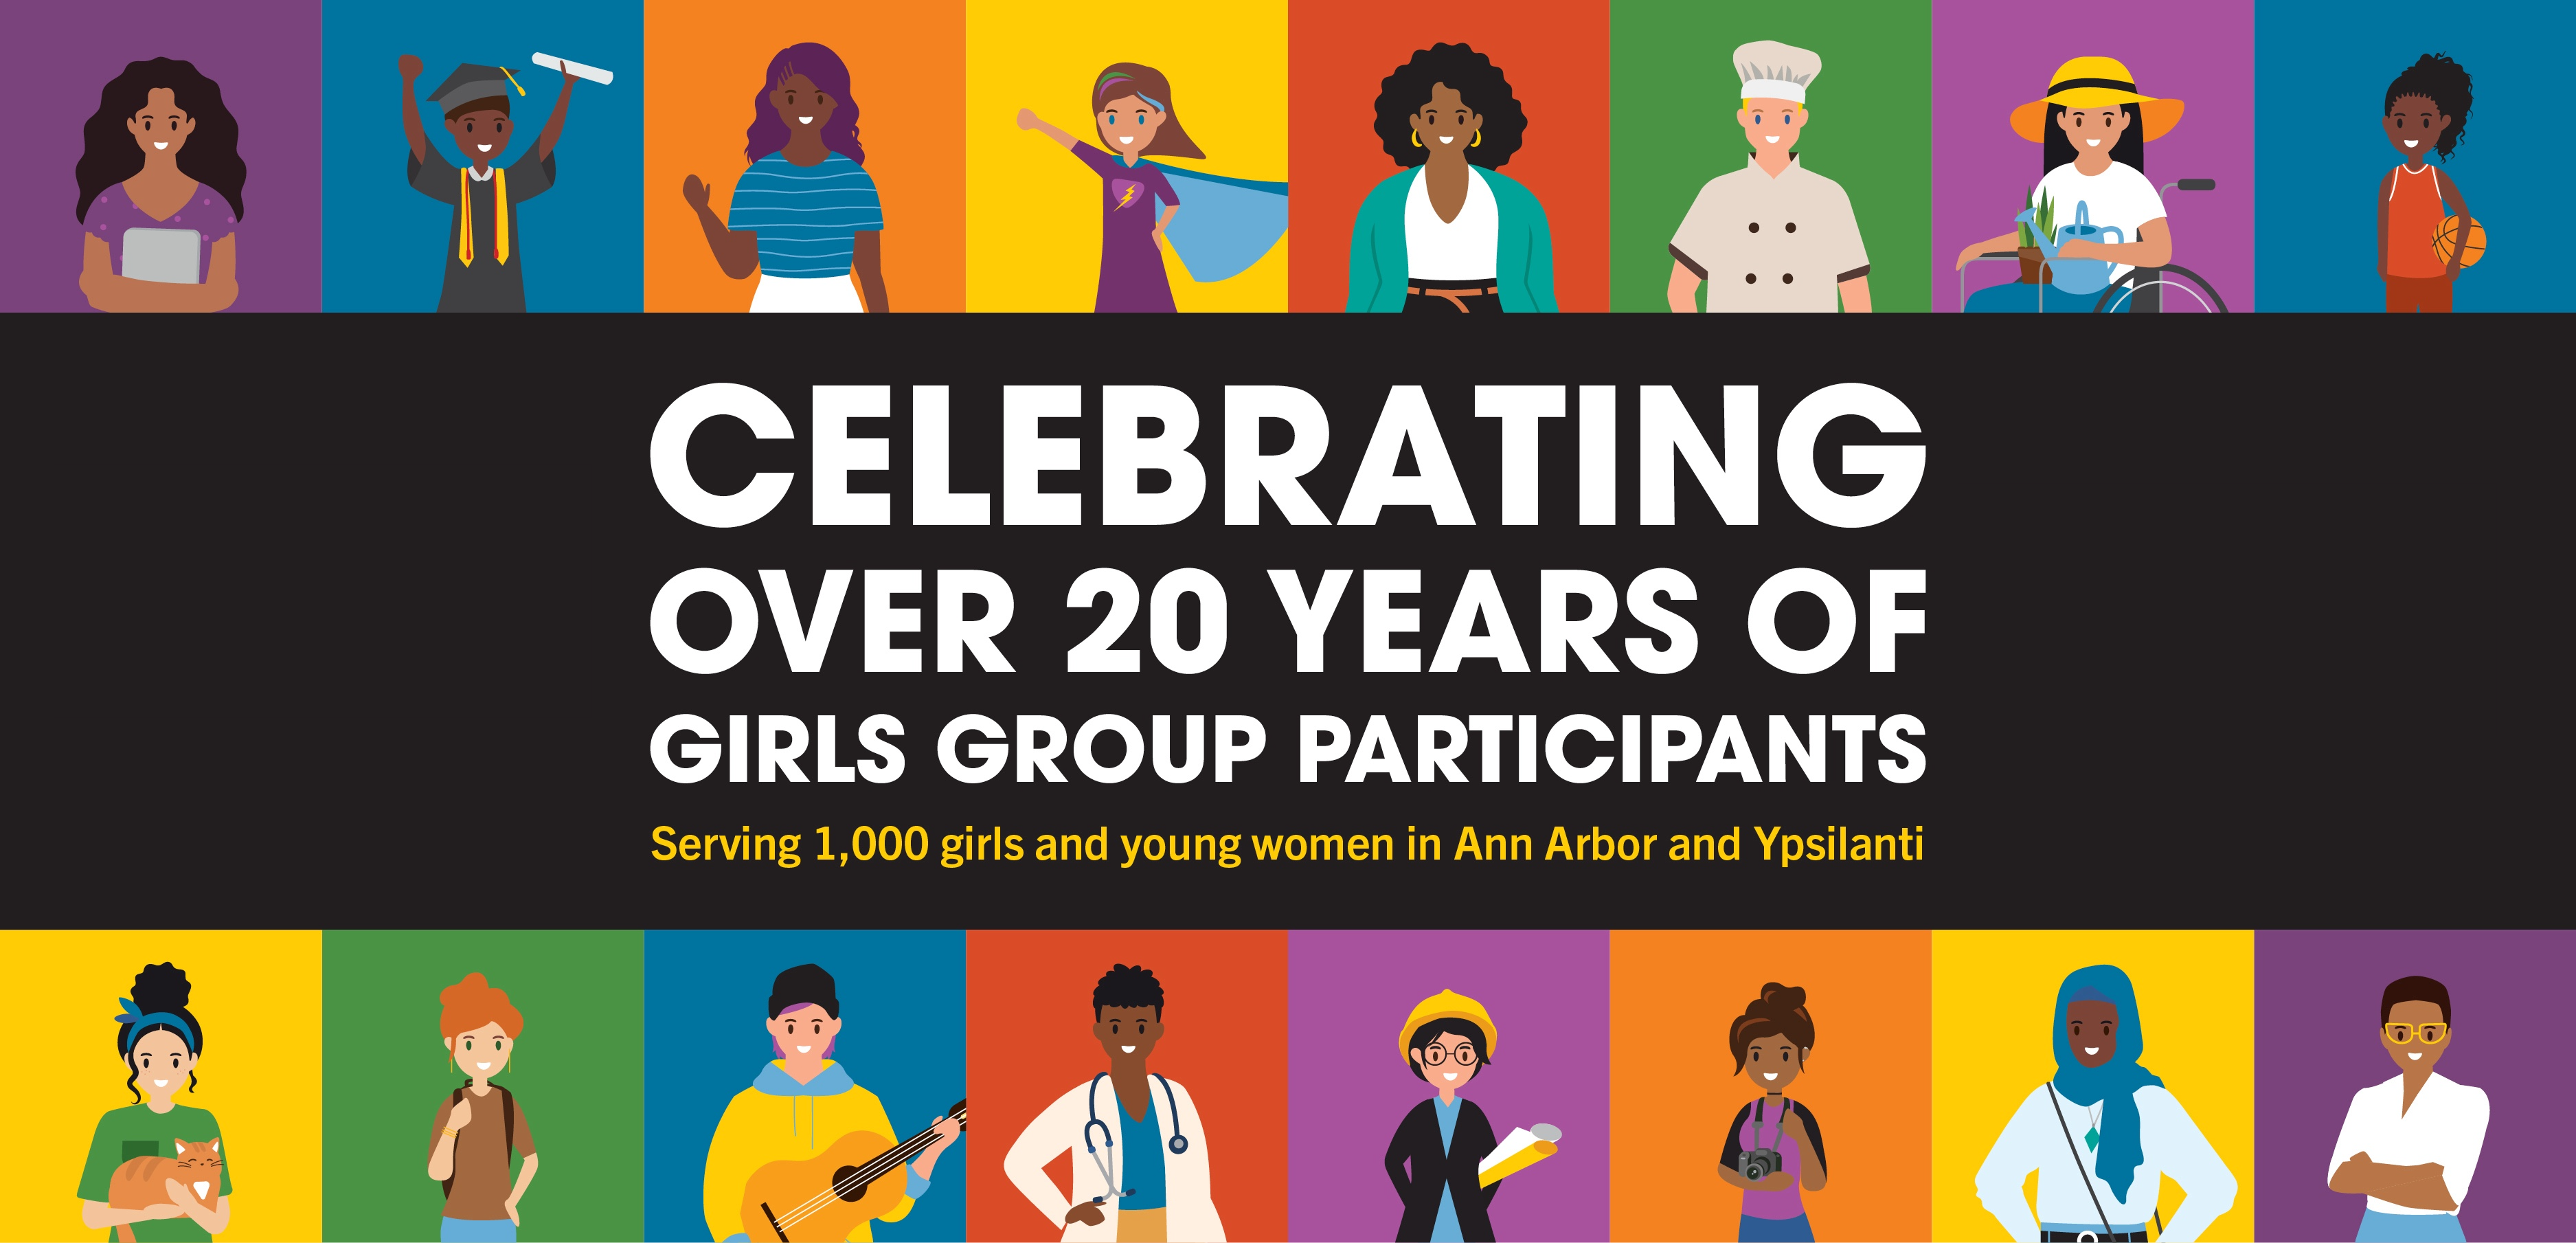 Celebrating Over 20 Years of Girls Group Participants